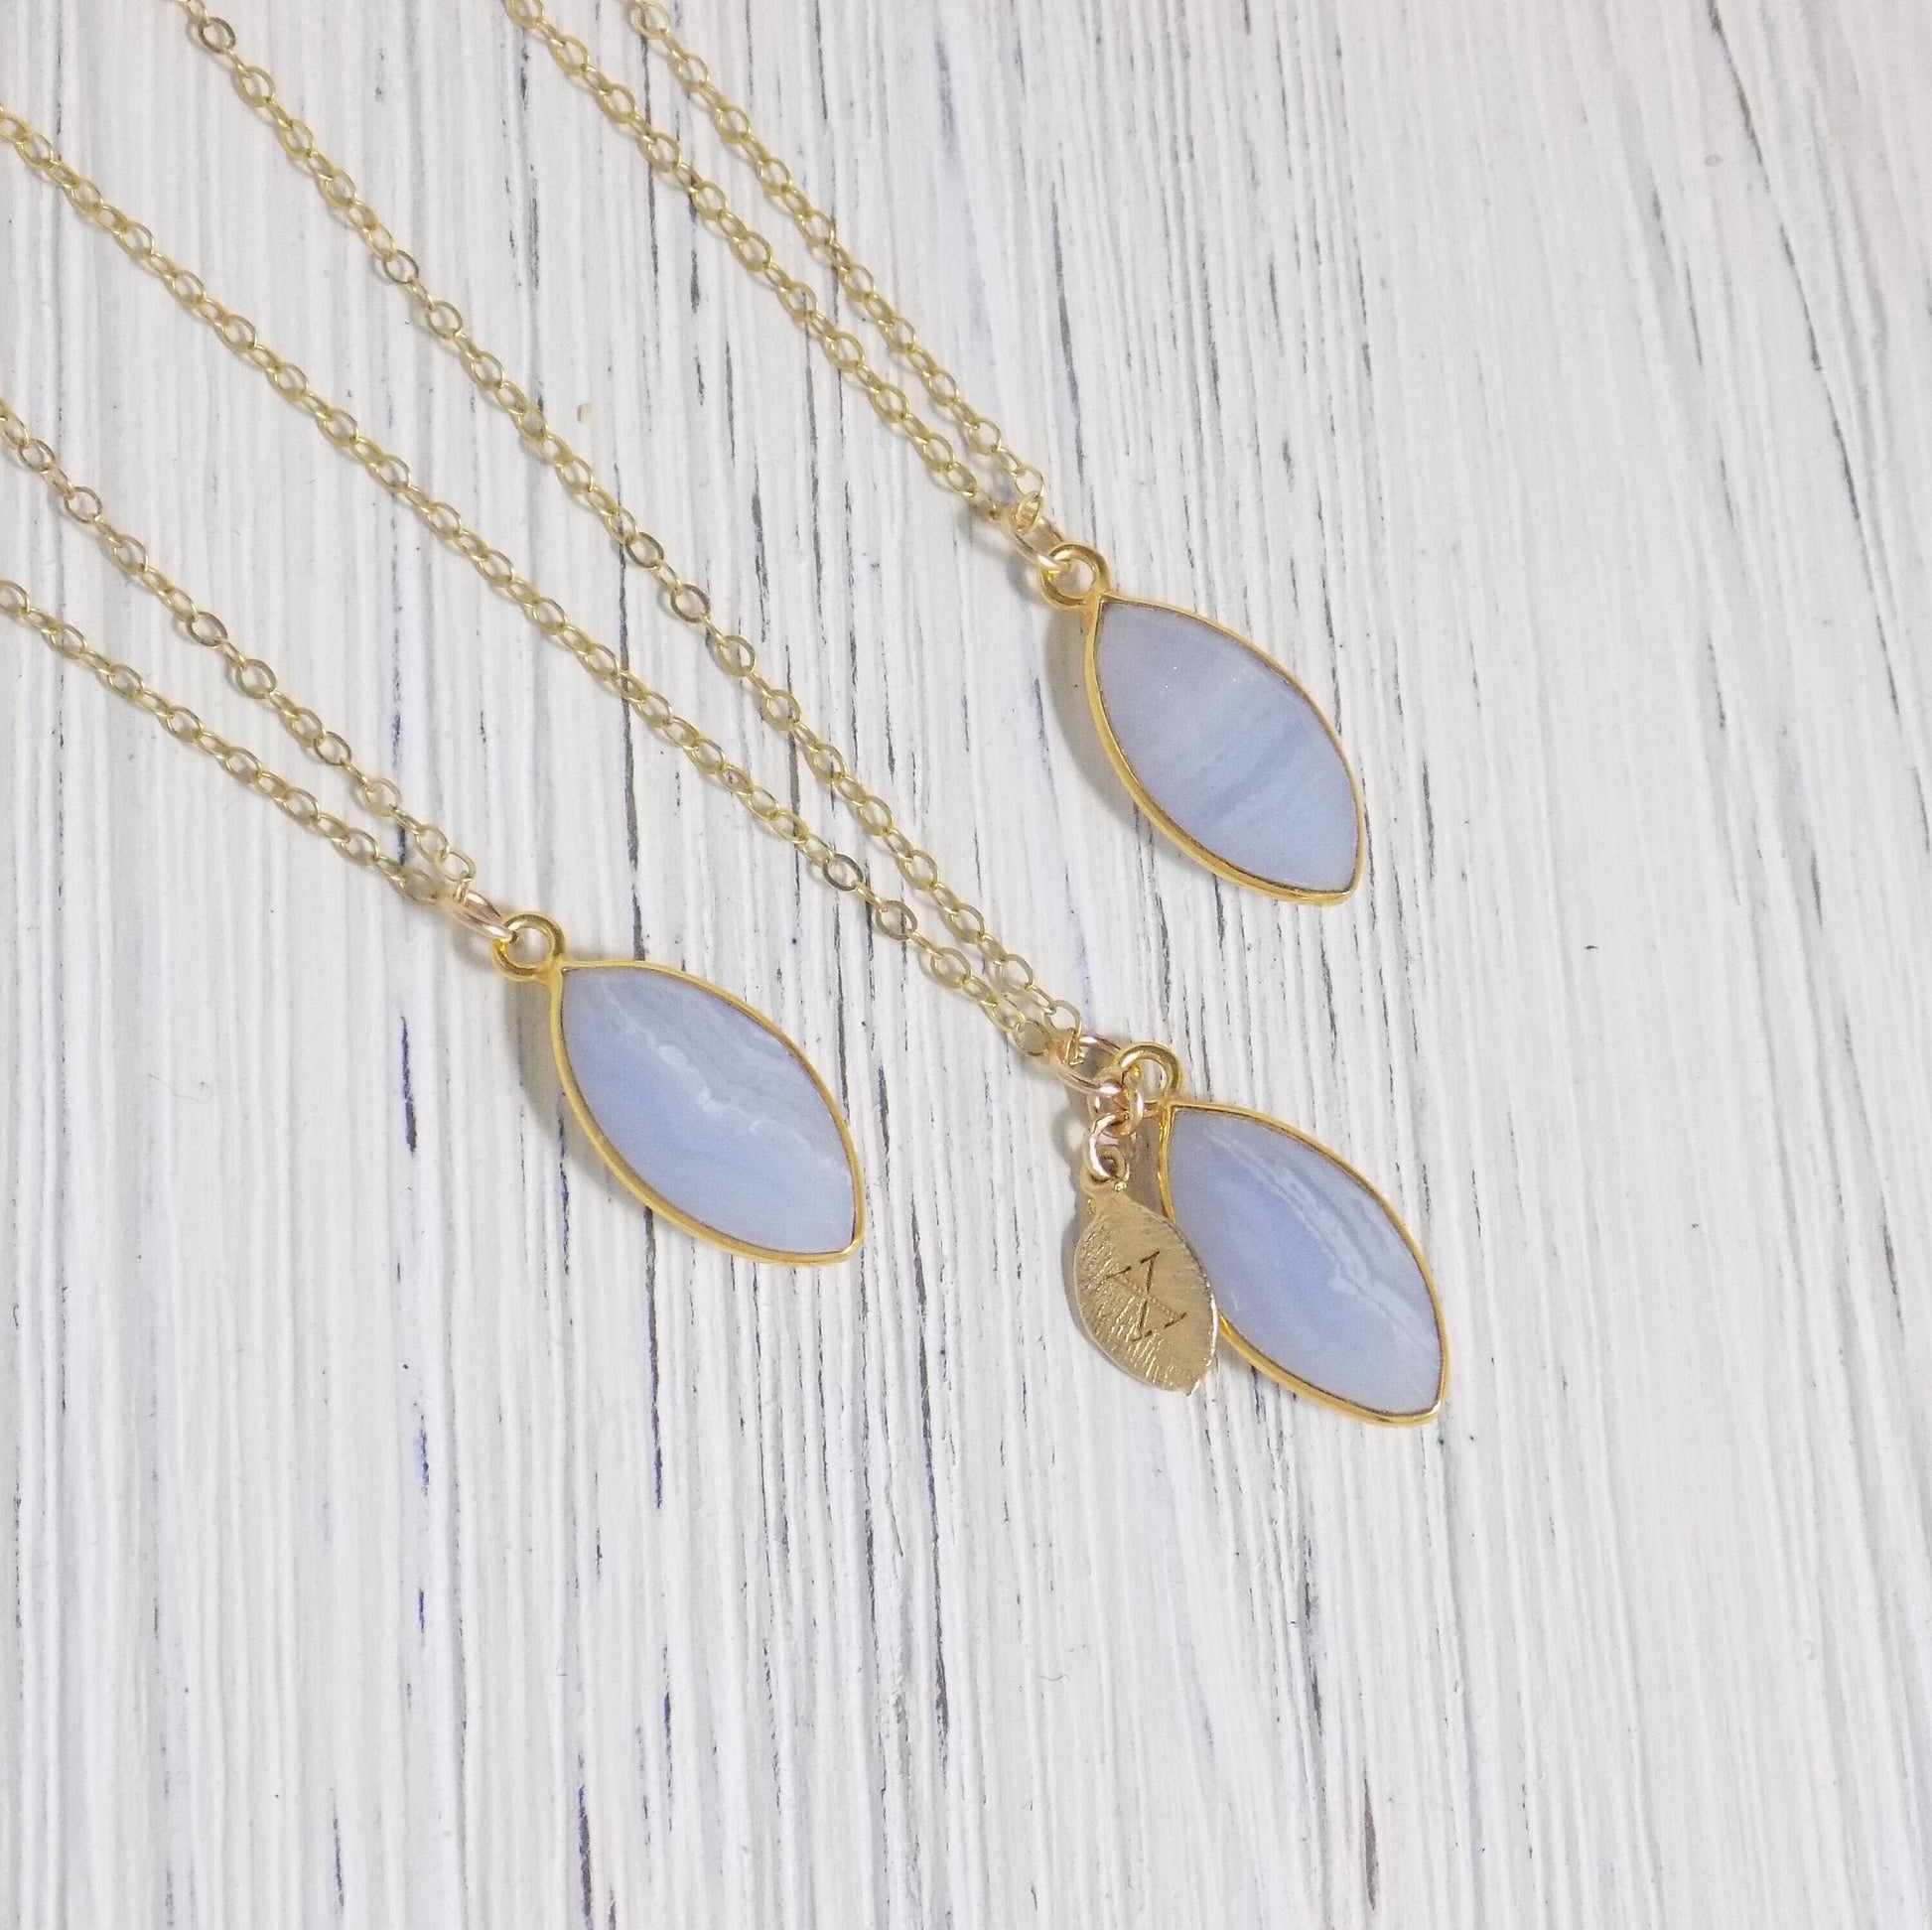 Natural Blue Lace Agate Necklace With Custom Initial on 14K Gold Filled Chain, M4-53